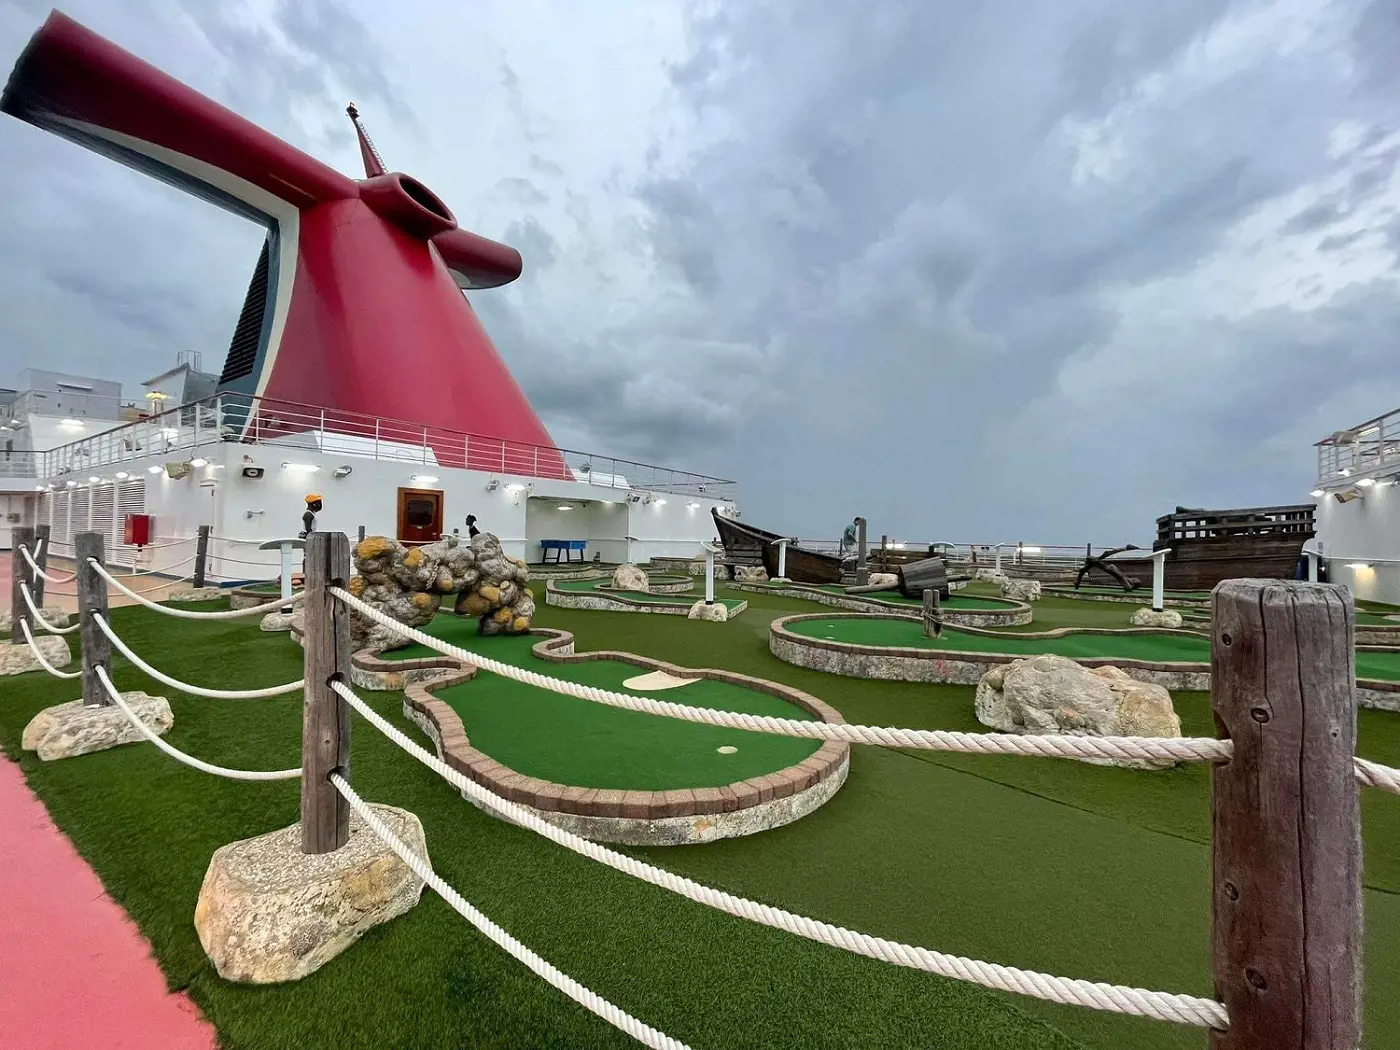 Mini-golf course of Carnival Dream pictured by Ronald Dsouza in August 2022